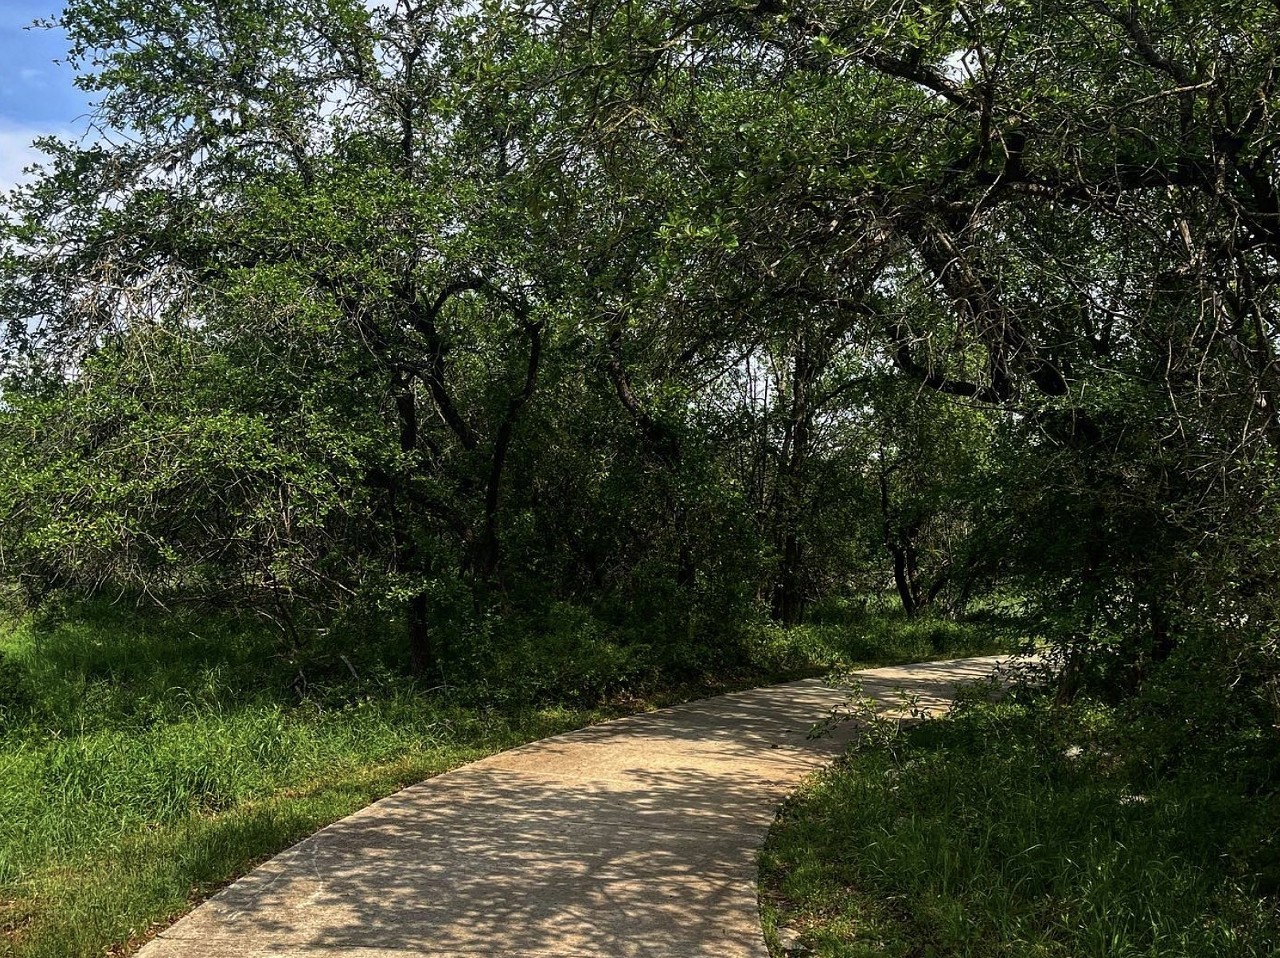 Panther Springs Park
22635 Wilderness Oak Road, (210) 207-8480, sanantonio.gov
Also known as Panther Springs Natural Area, this park features 2.5 miles of paved trails and a large dog park.